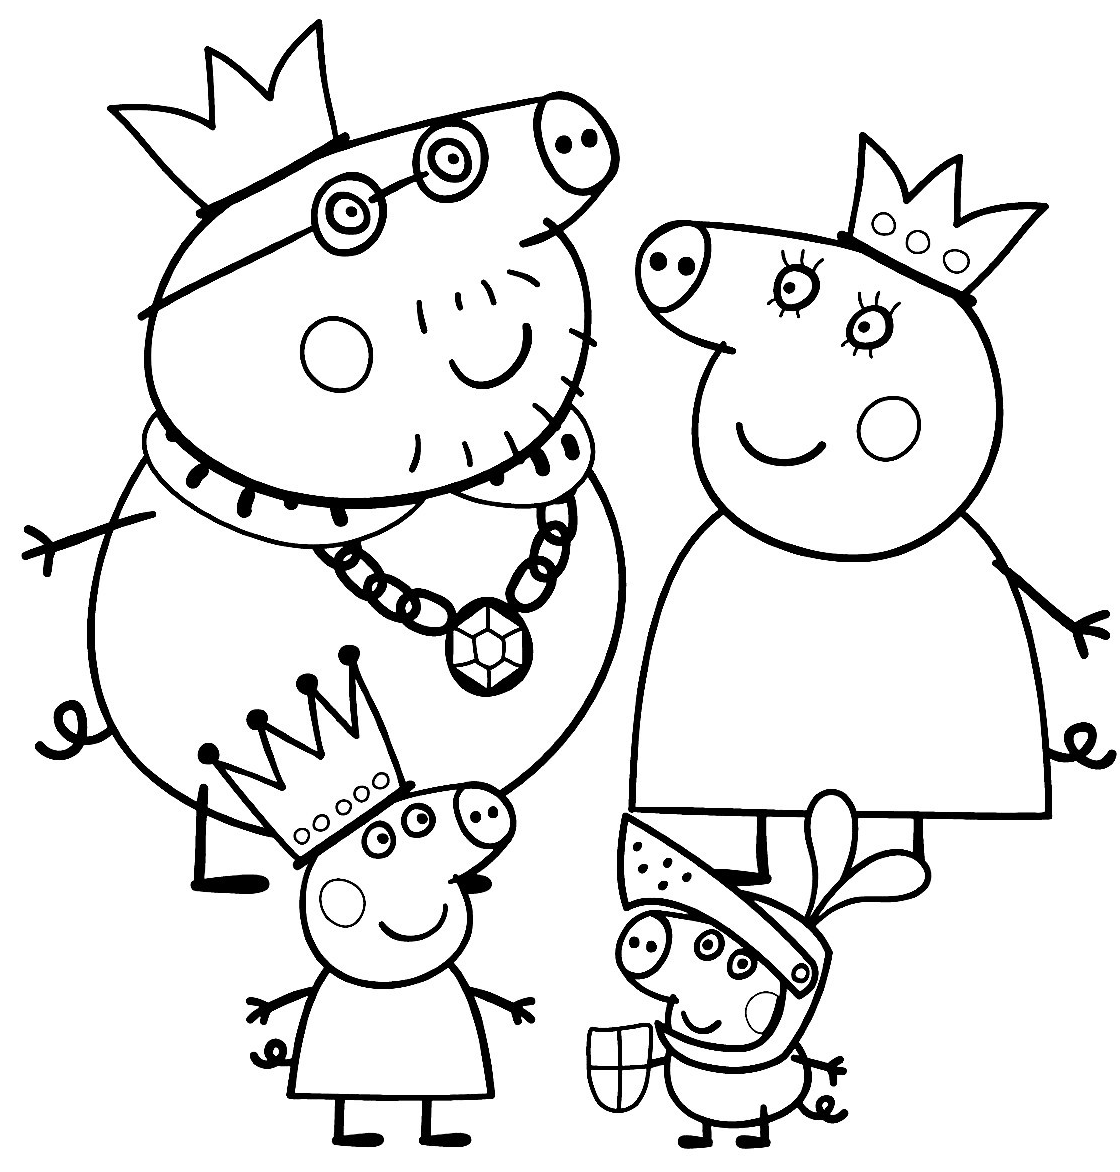 peppa-pig-coloring-pages-printable-pdf-peppa-pig-colouring-pages